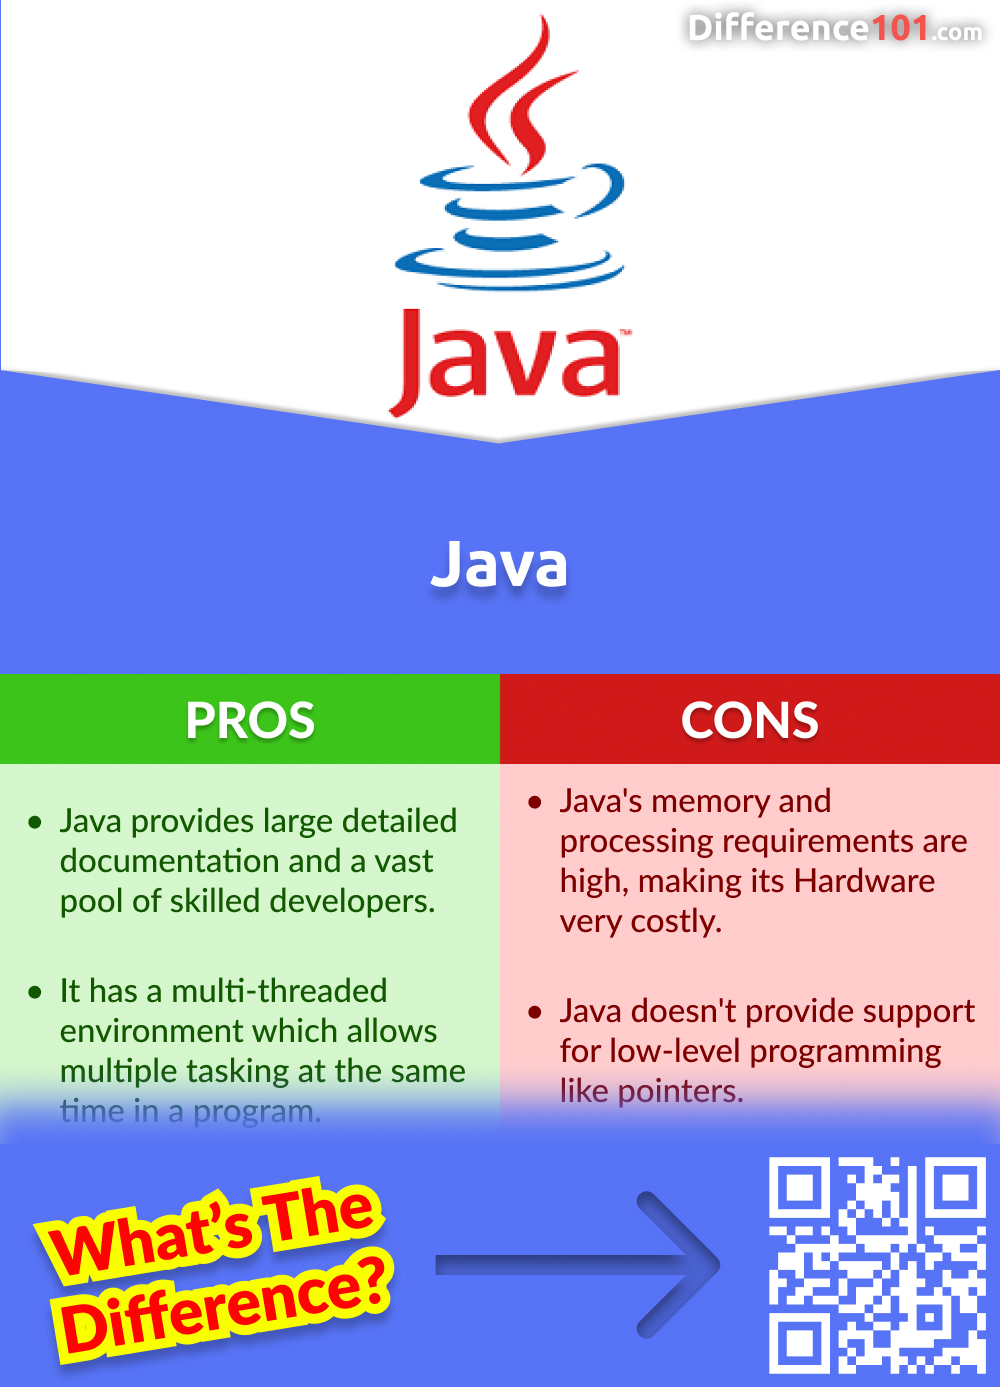 Java Pros and Cons
